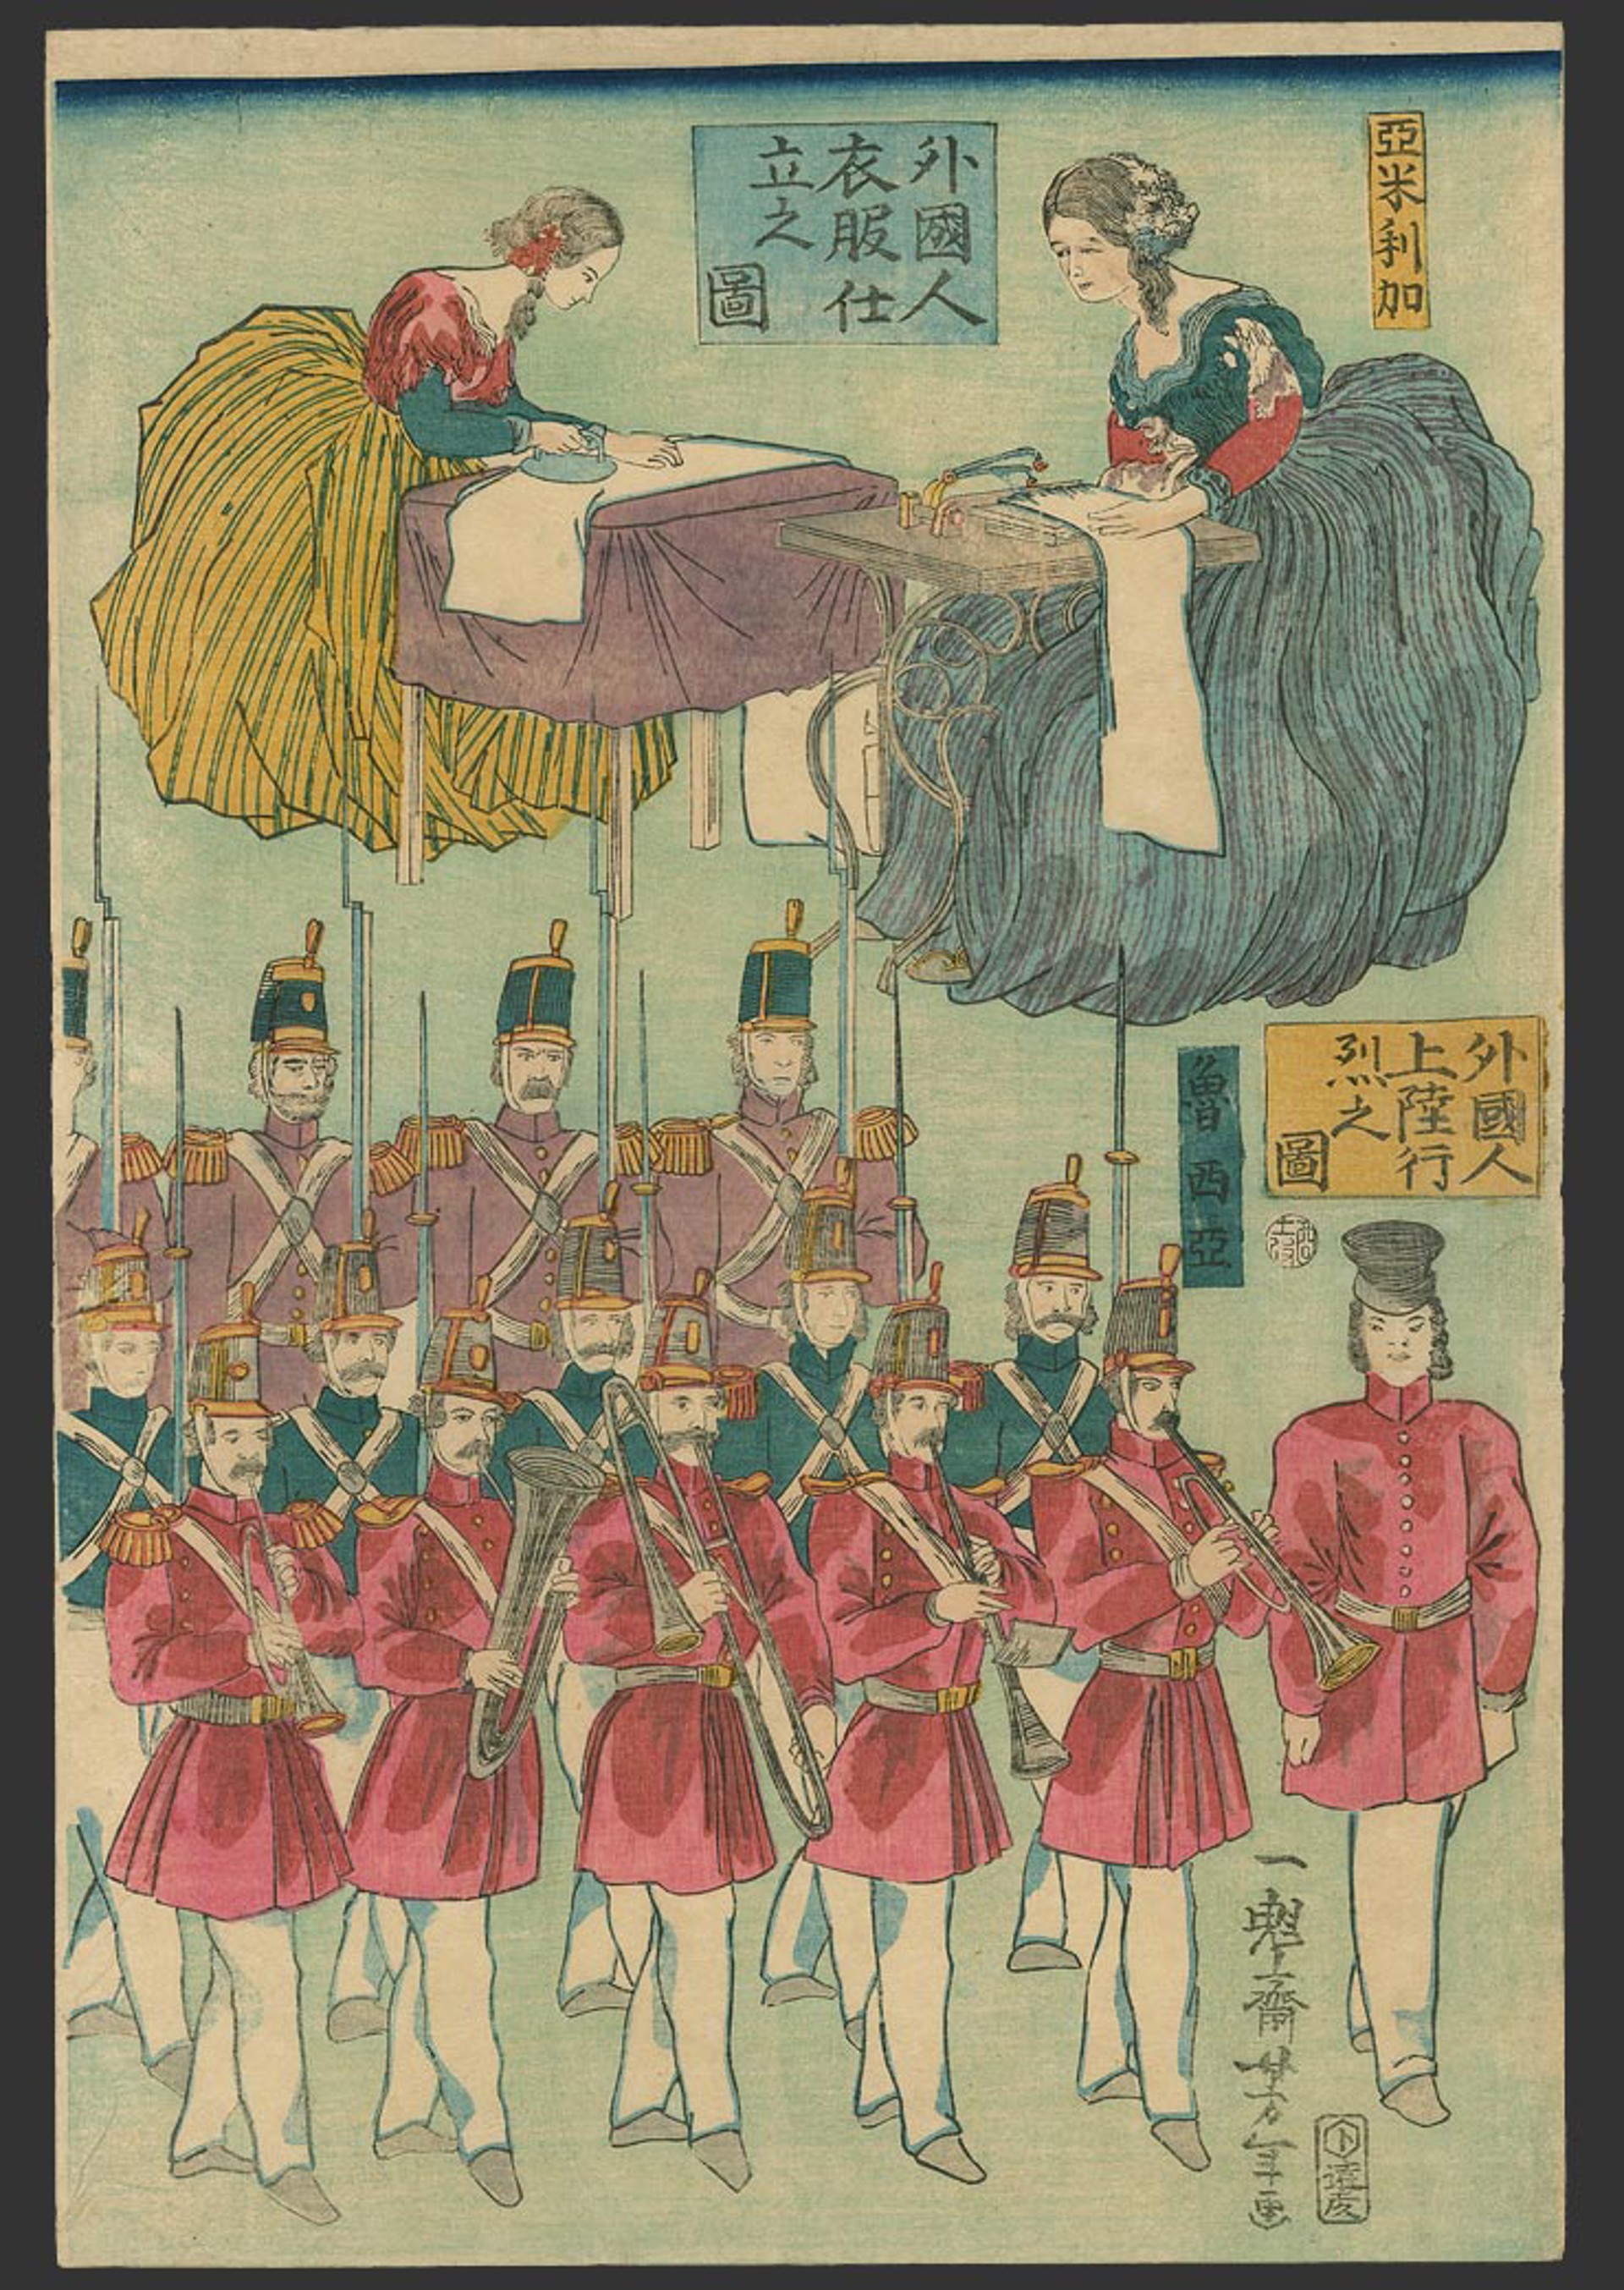 Dressmakers and soldiers parading Scenes of Foreigners by Yoshitoshi